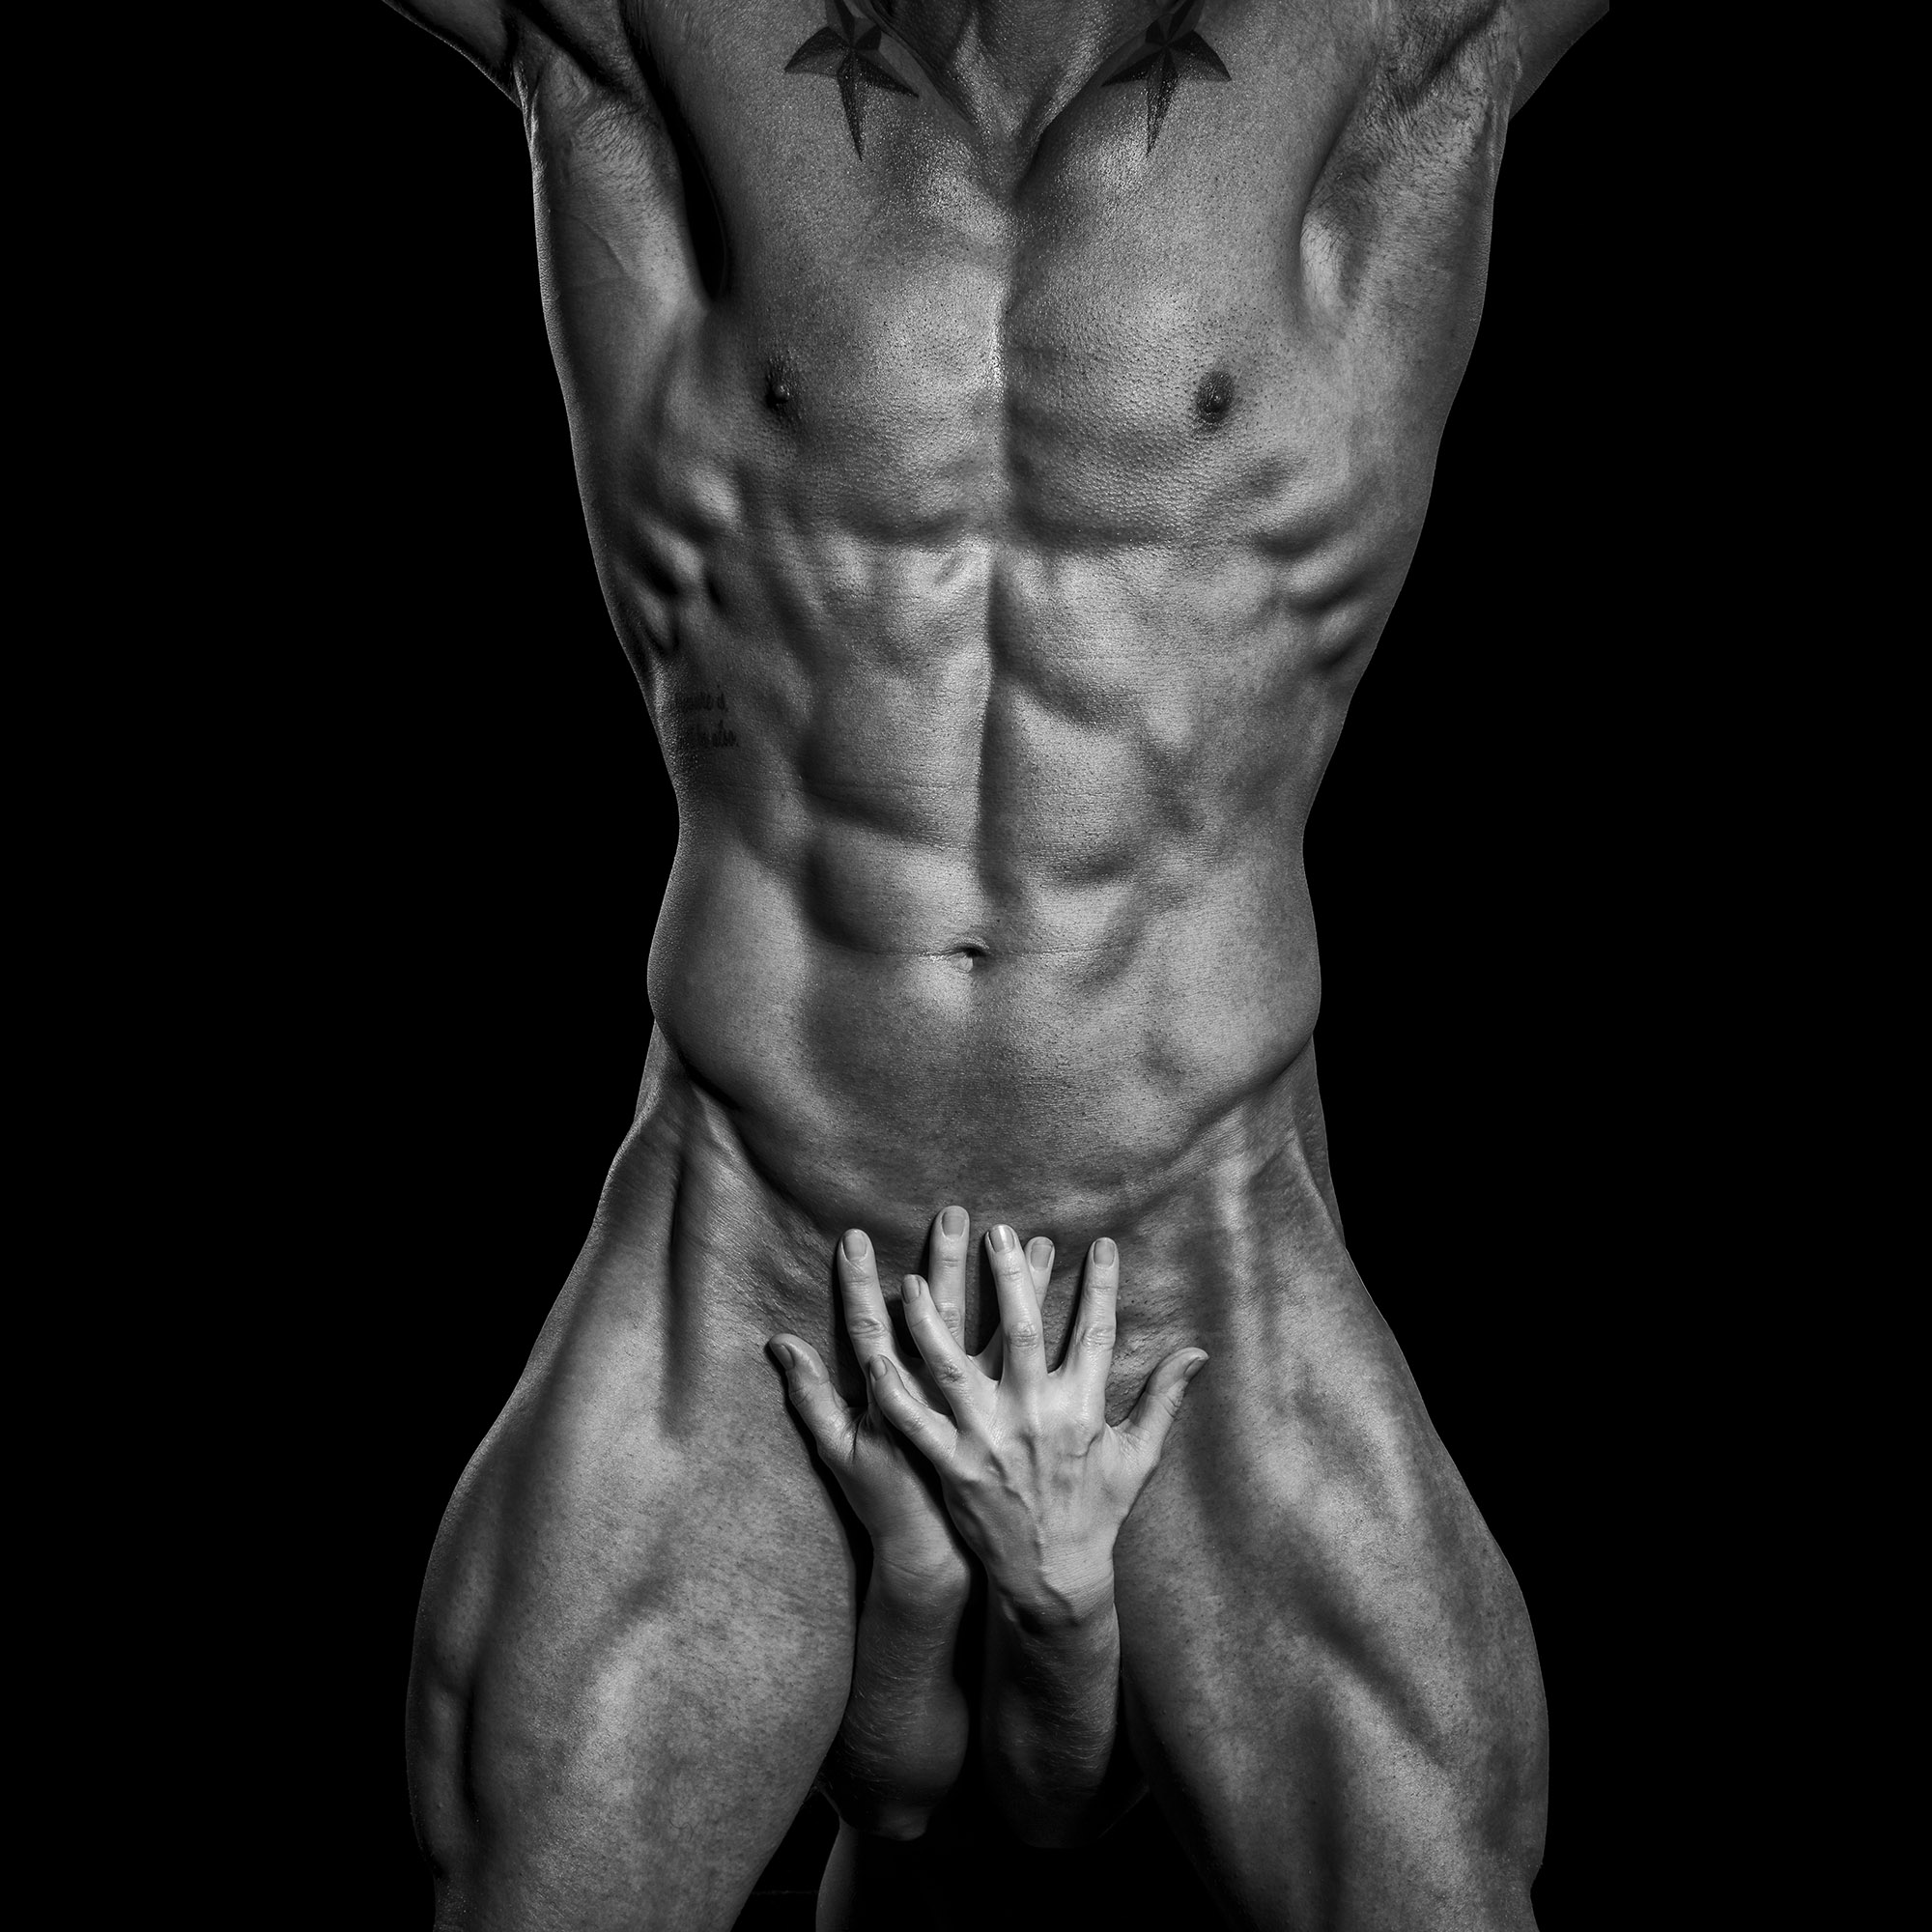 Nude physique model.